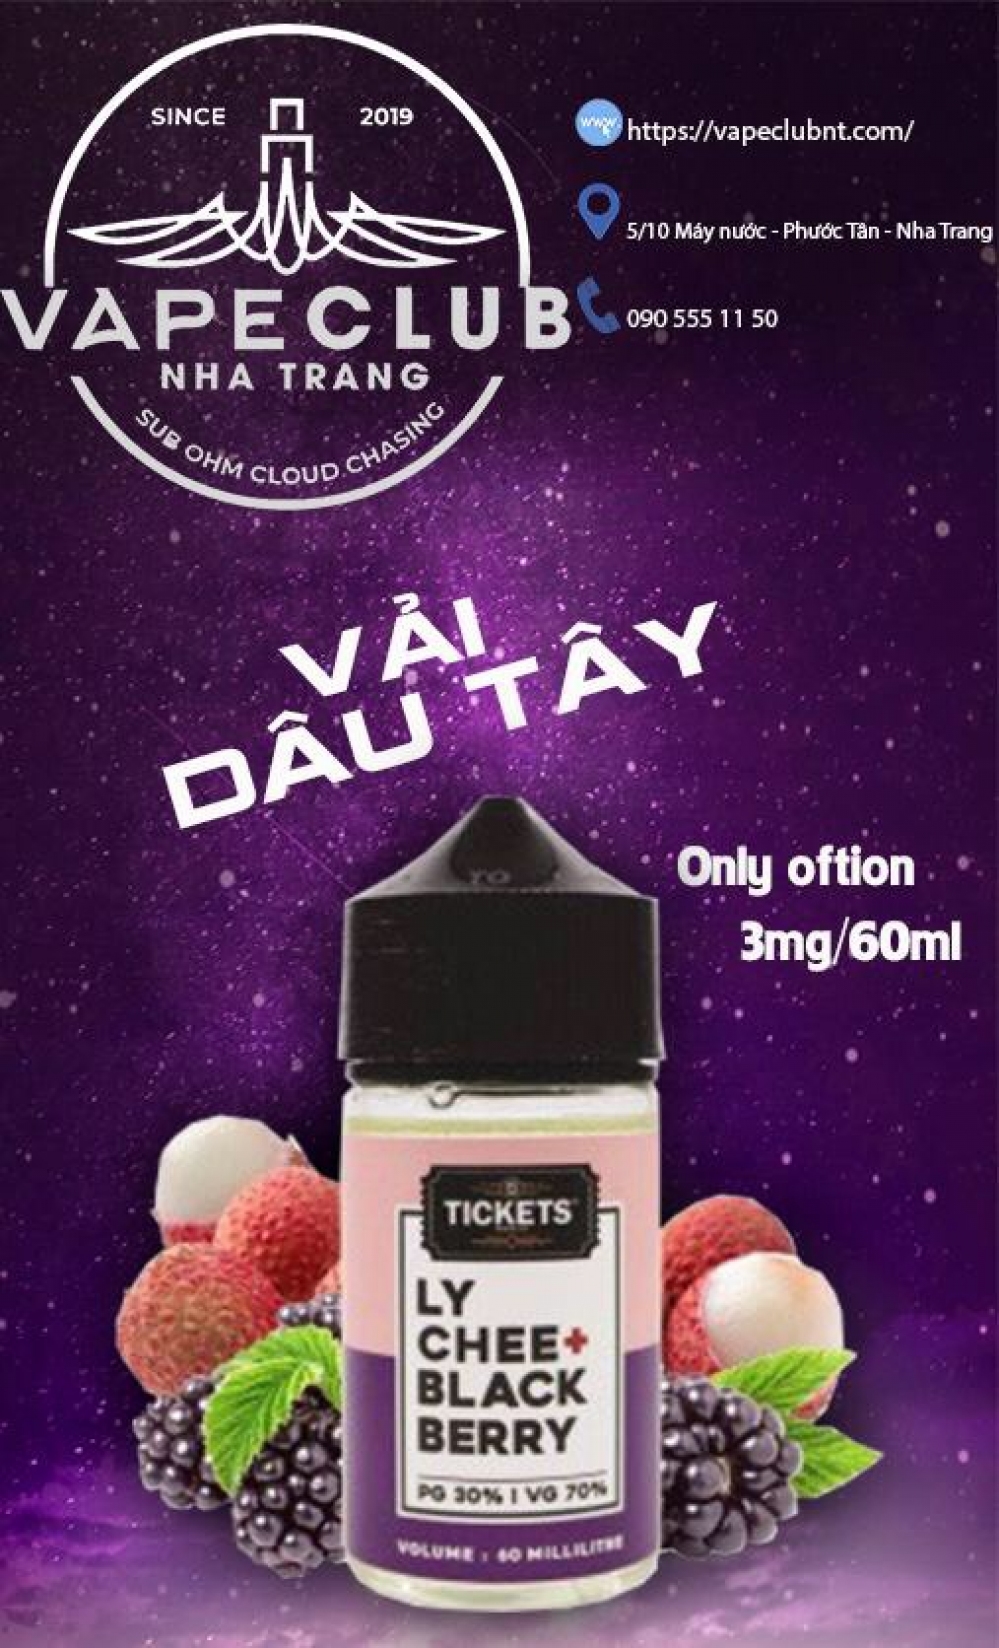 TICKETS LYCHEE + VIỆT QUẤT